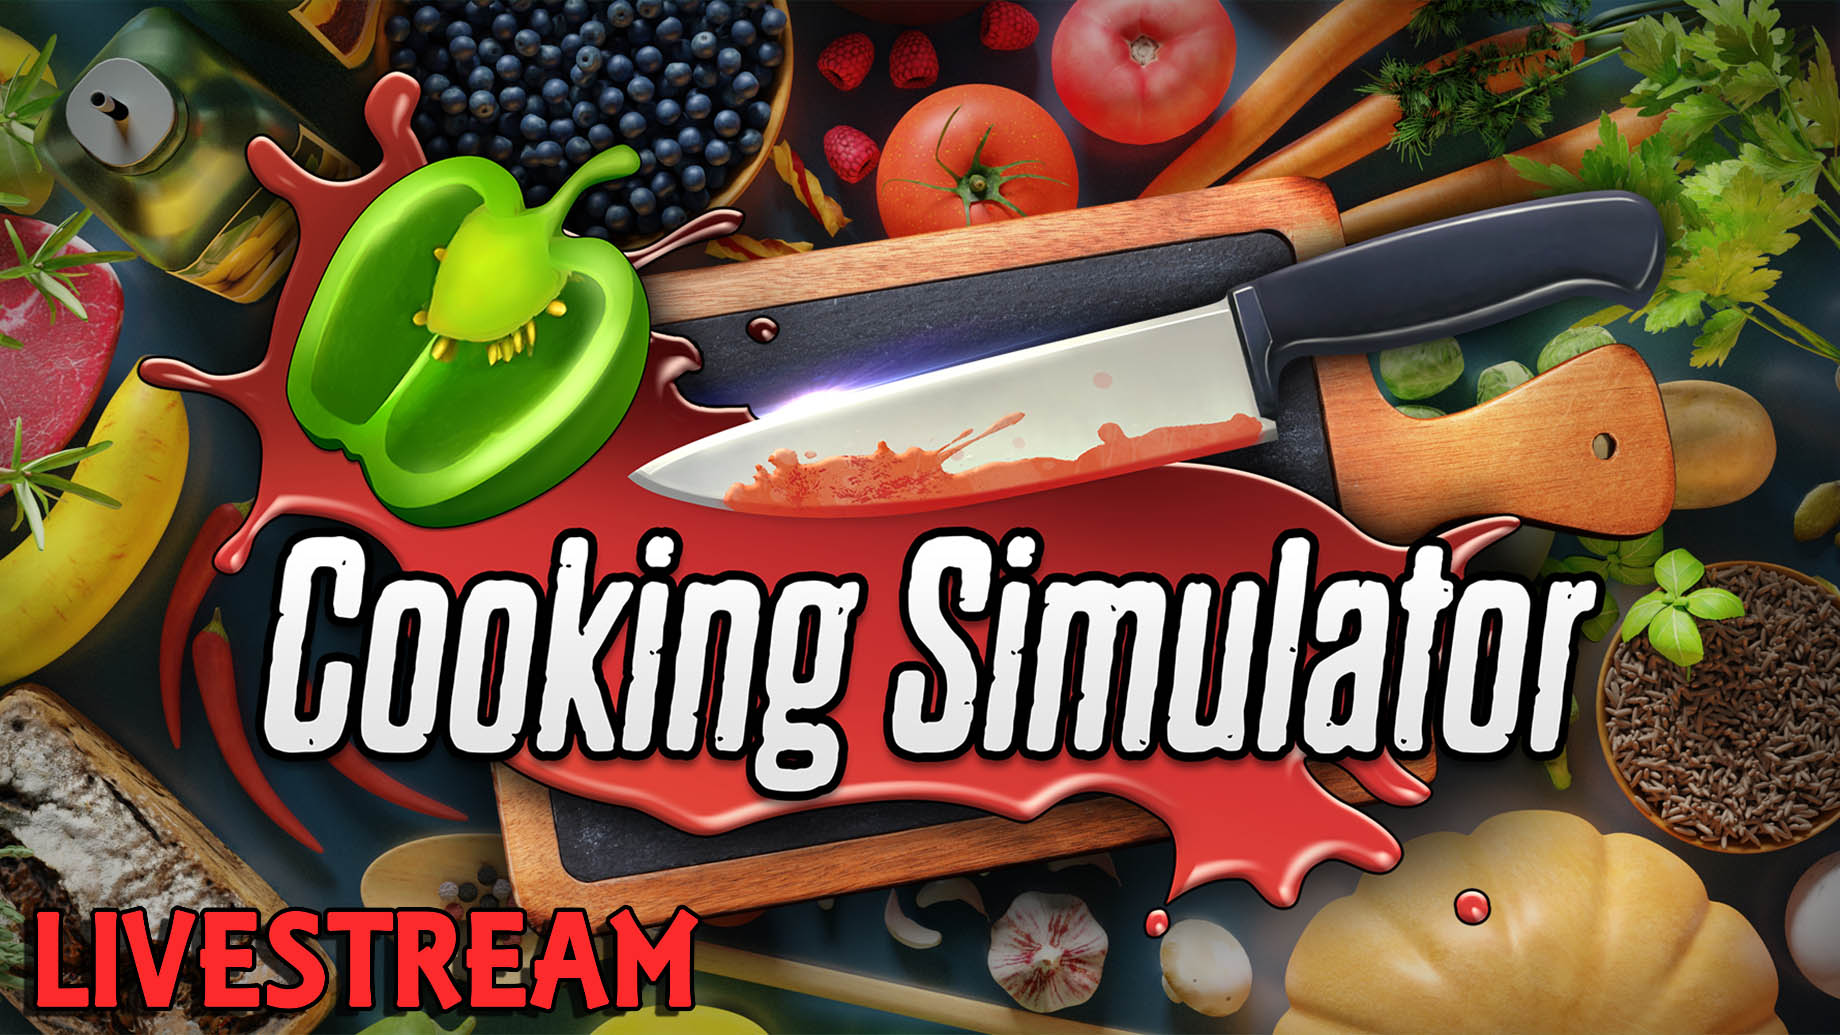 Pizza Time! Cooking Simulator